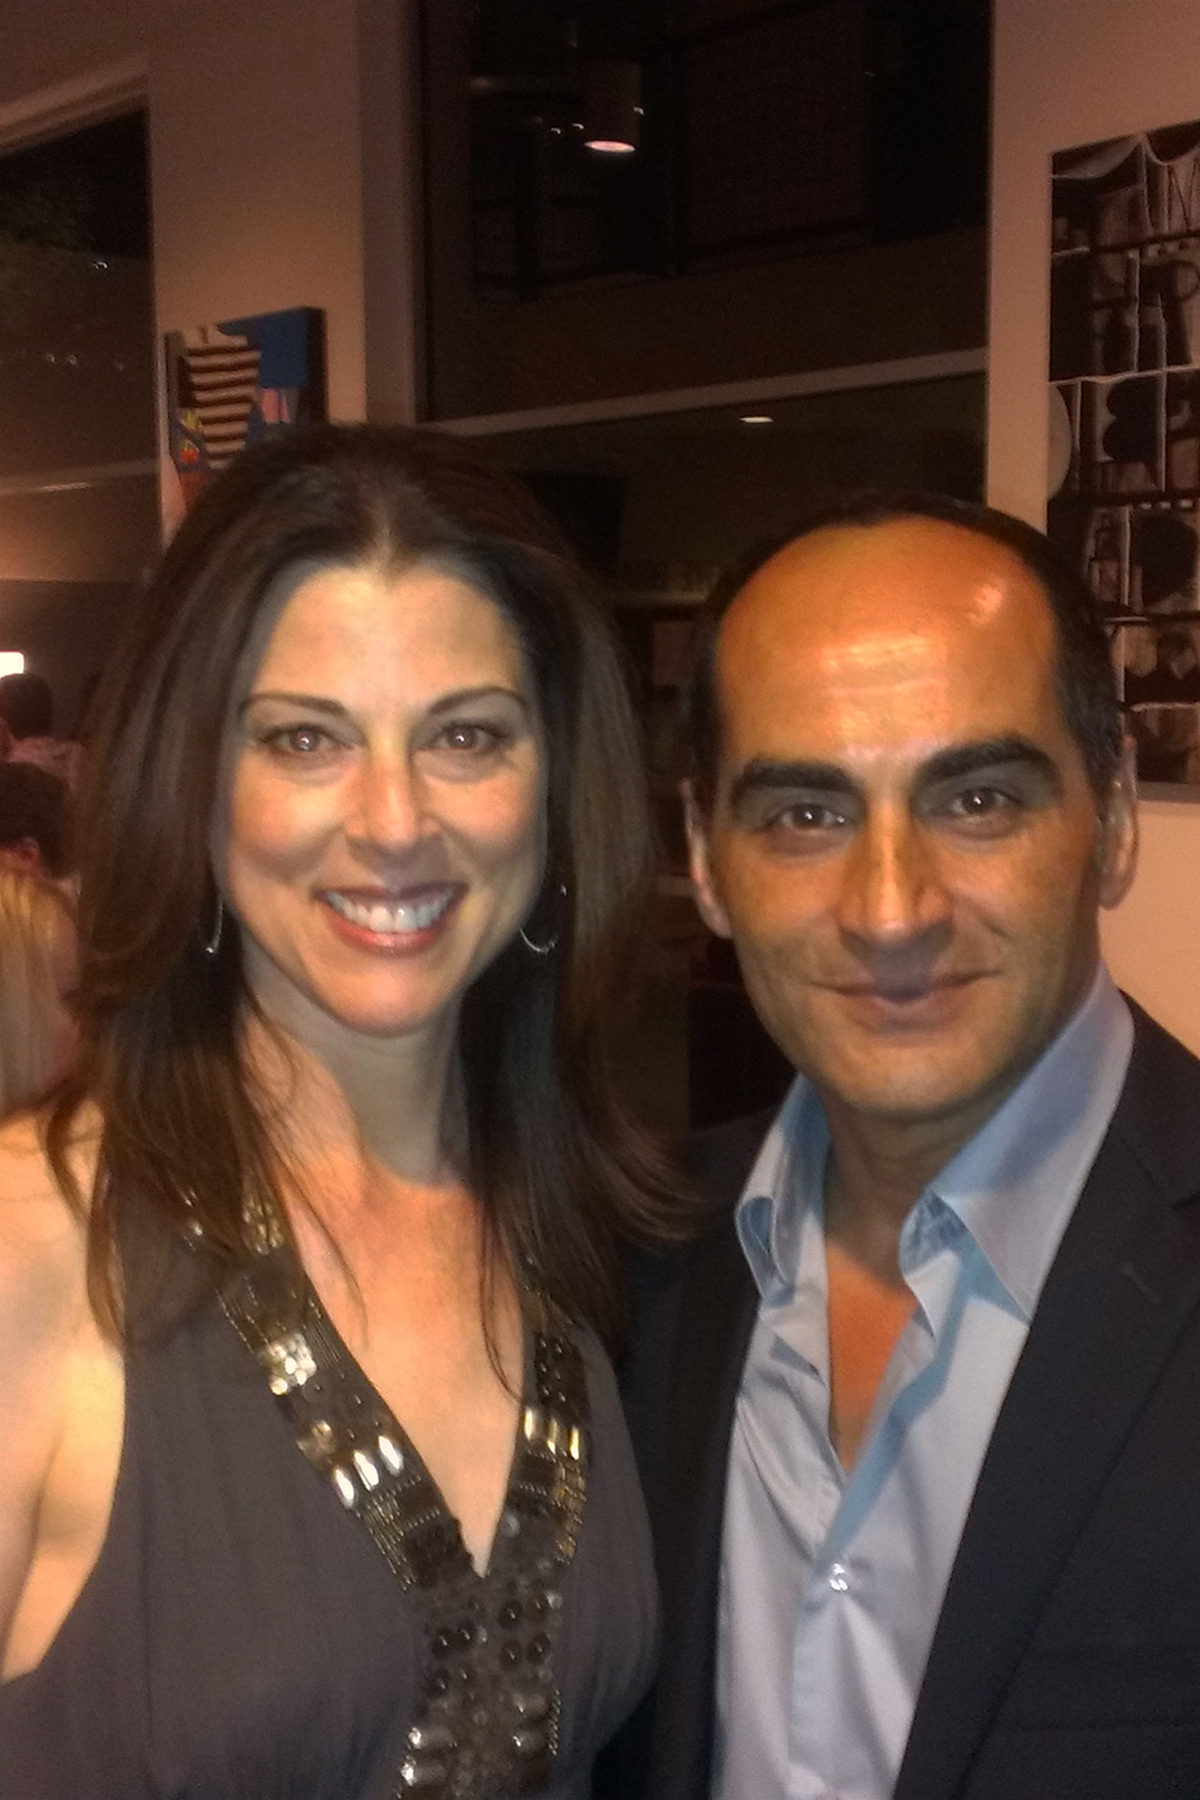 with Navid Negahban at premeire of Cash For Gold